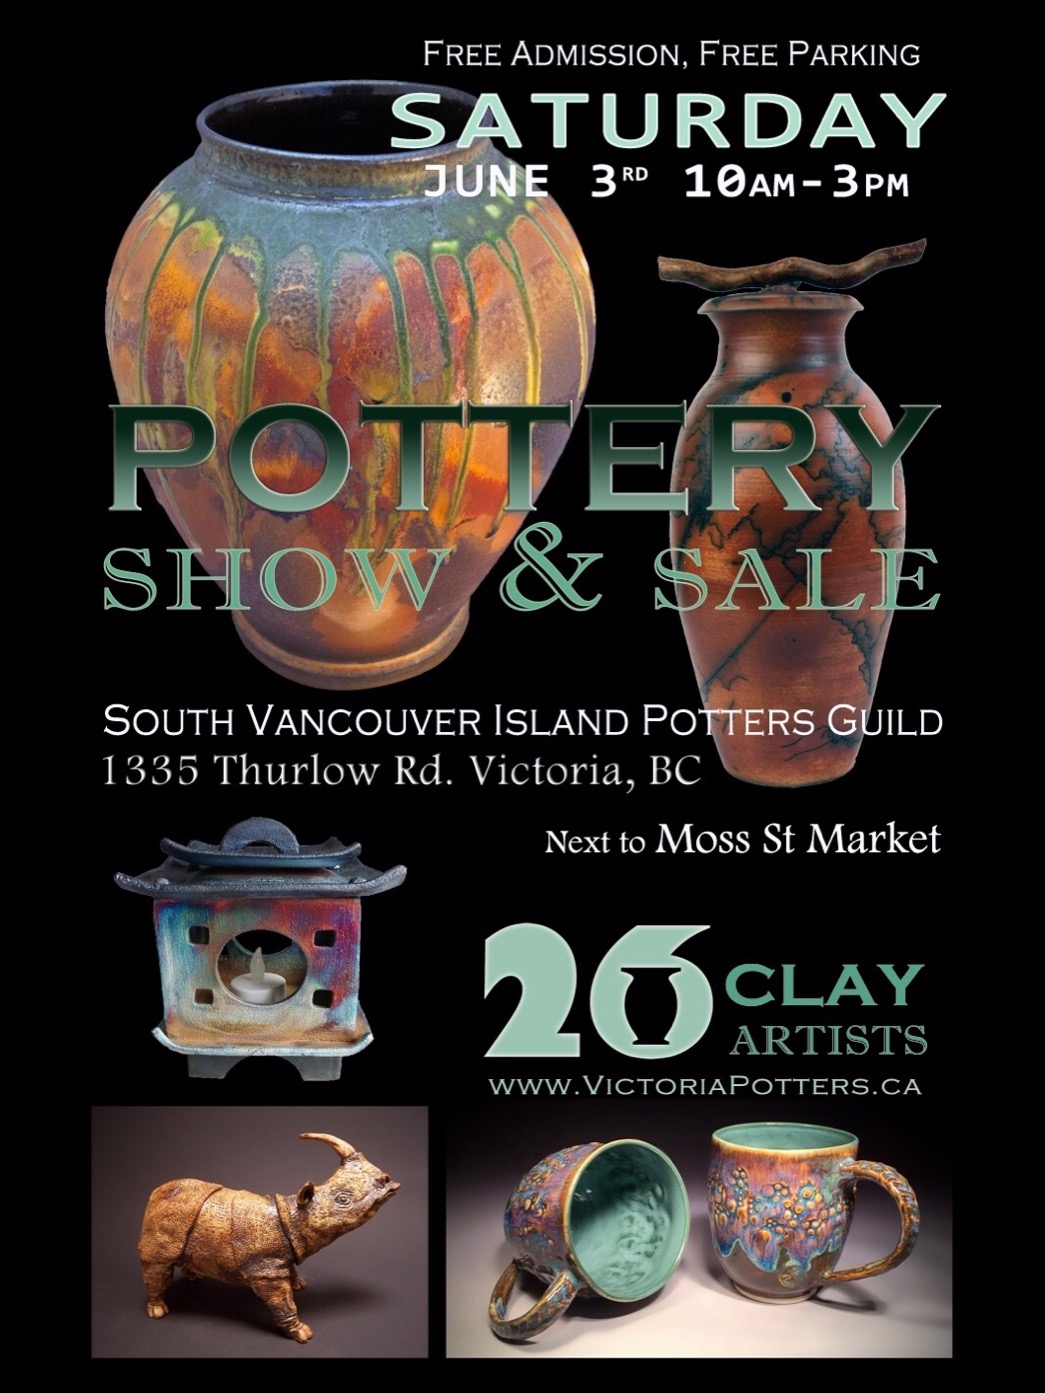 Annual Potters Guild Show and Sale - image